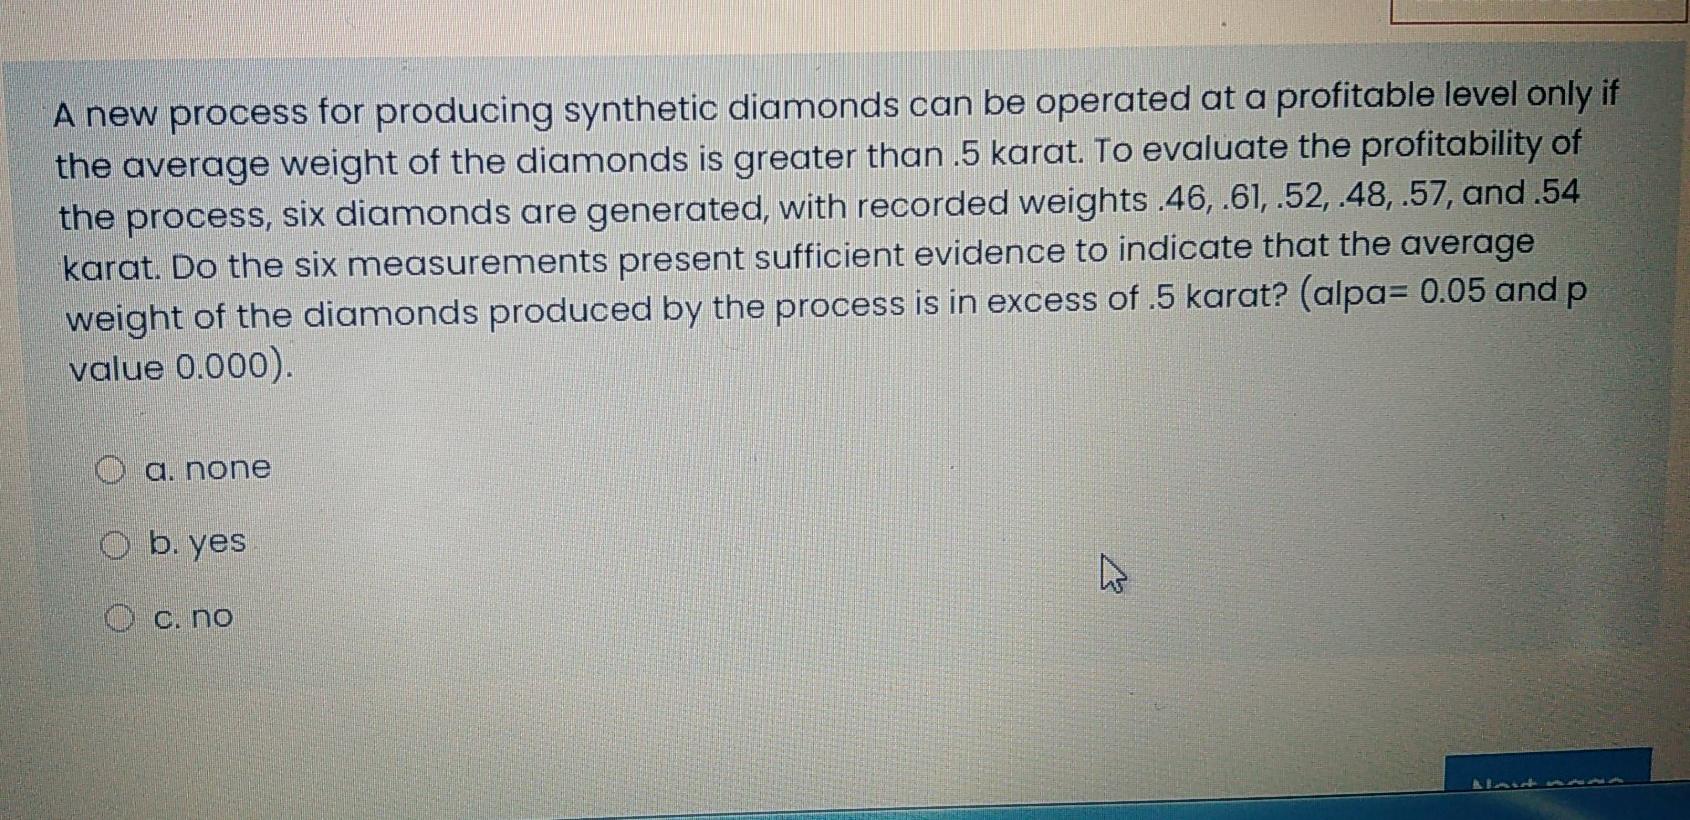 A New Process For Producing Synthetic Diamonds Can Be Operated At A Profitable Level Only If The Average Weight Of The D 1